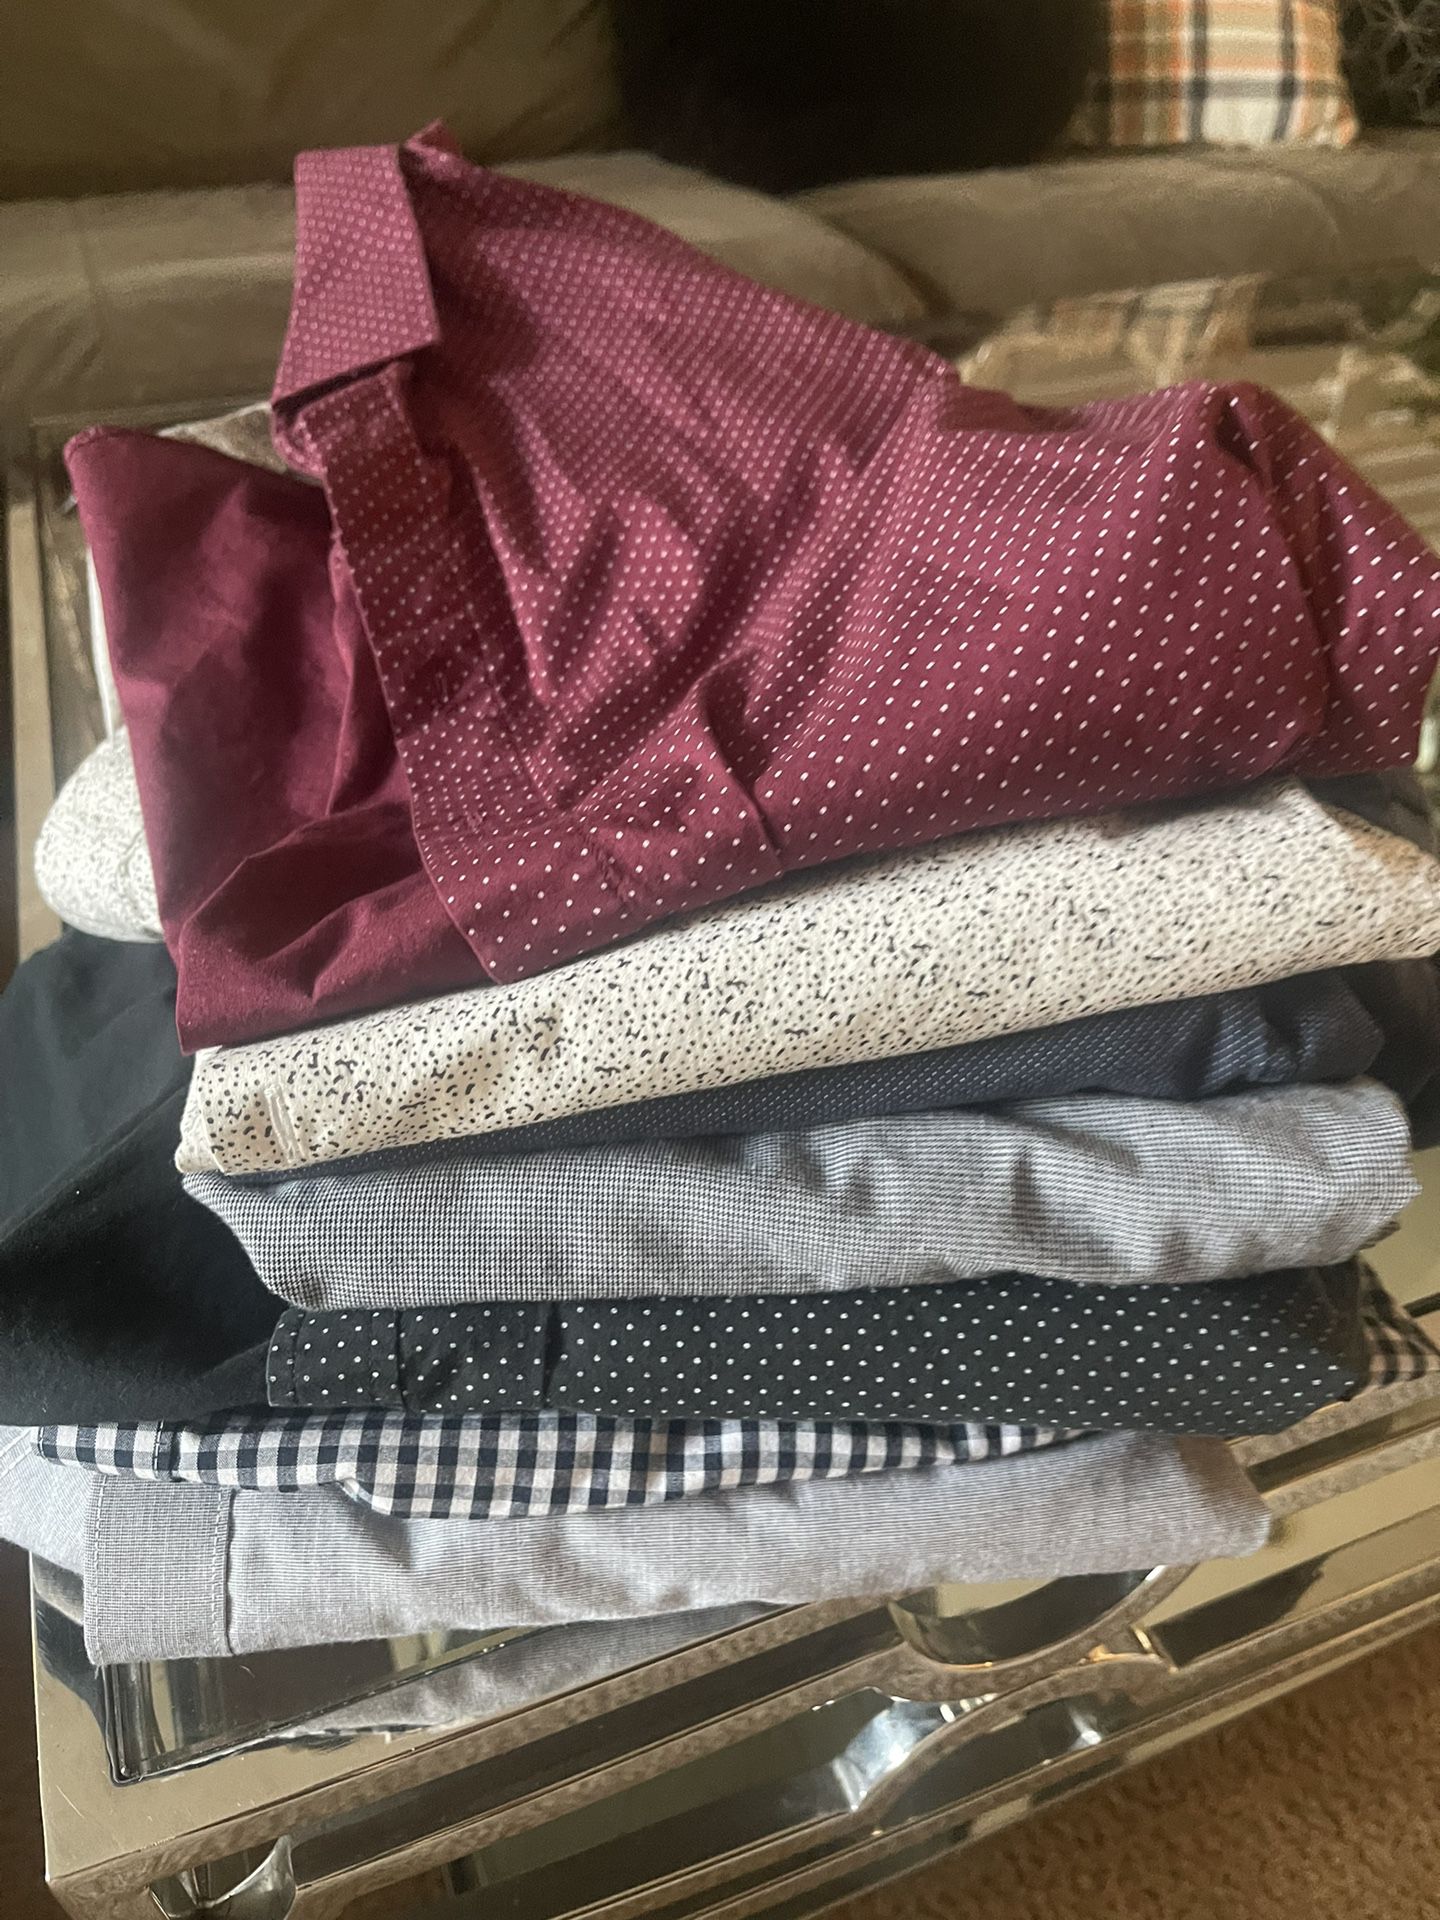 Used Clothes Dress Shirts, Sweater , Shirts